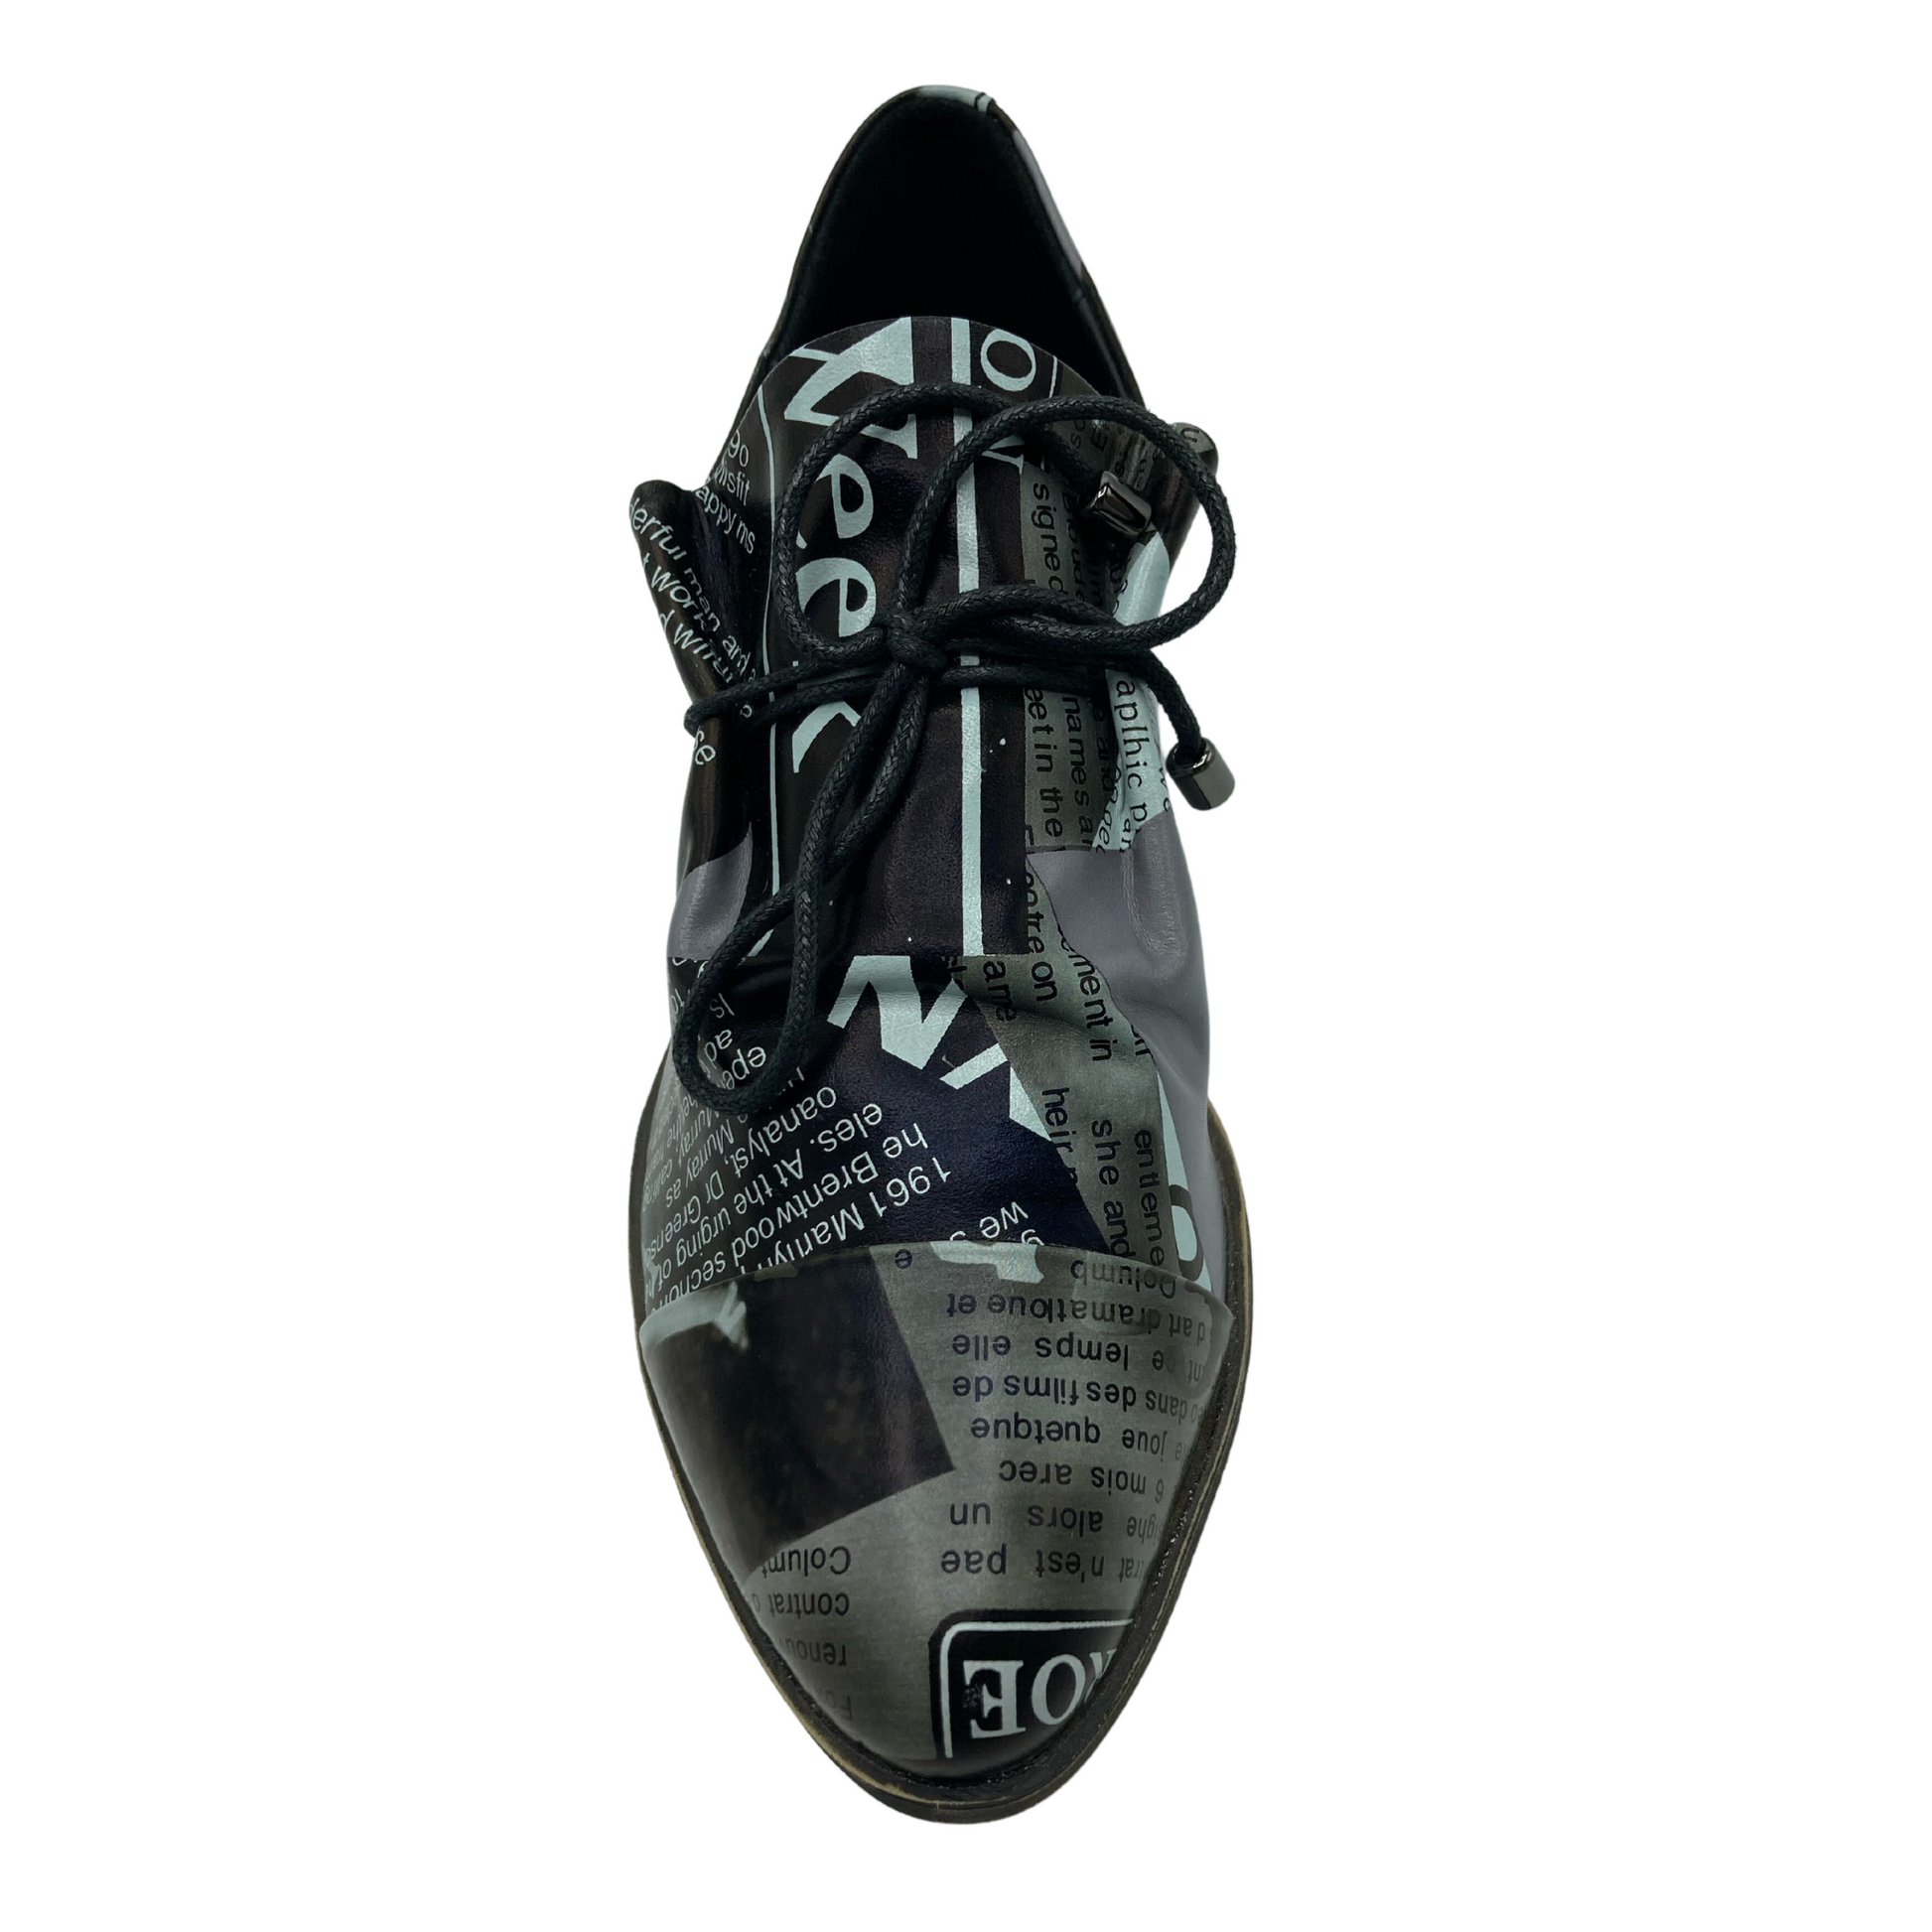 Top view of a leather shoe with newsprint design. Laces are black with shiny black aglets